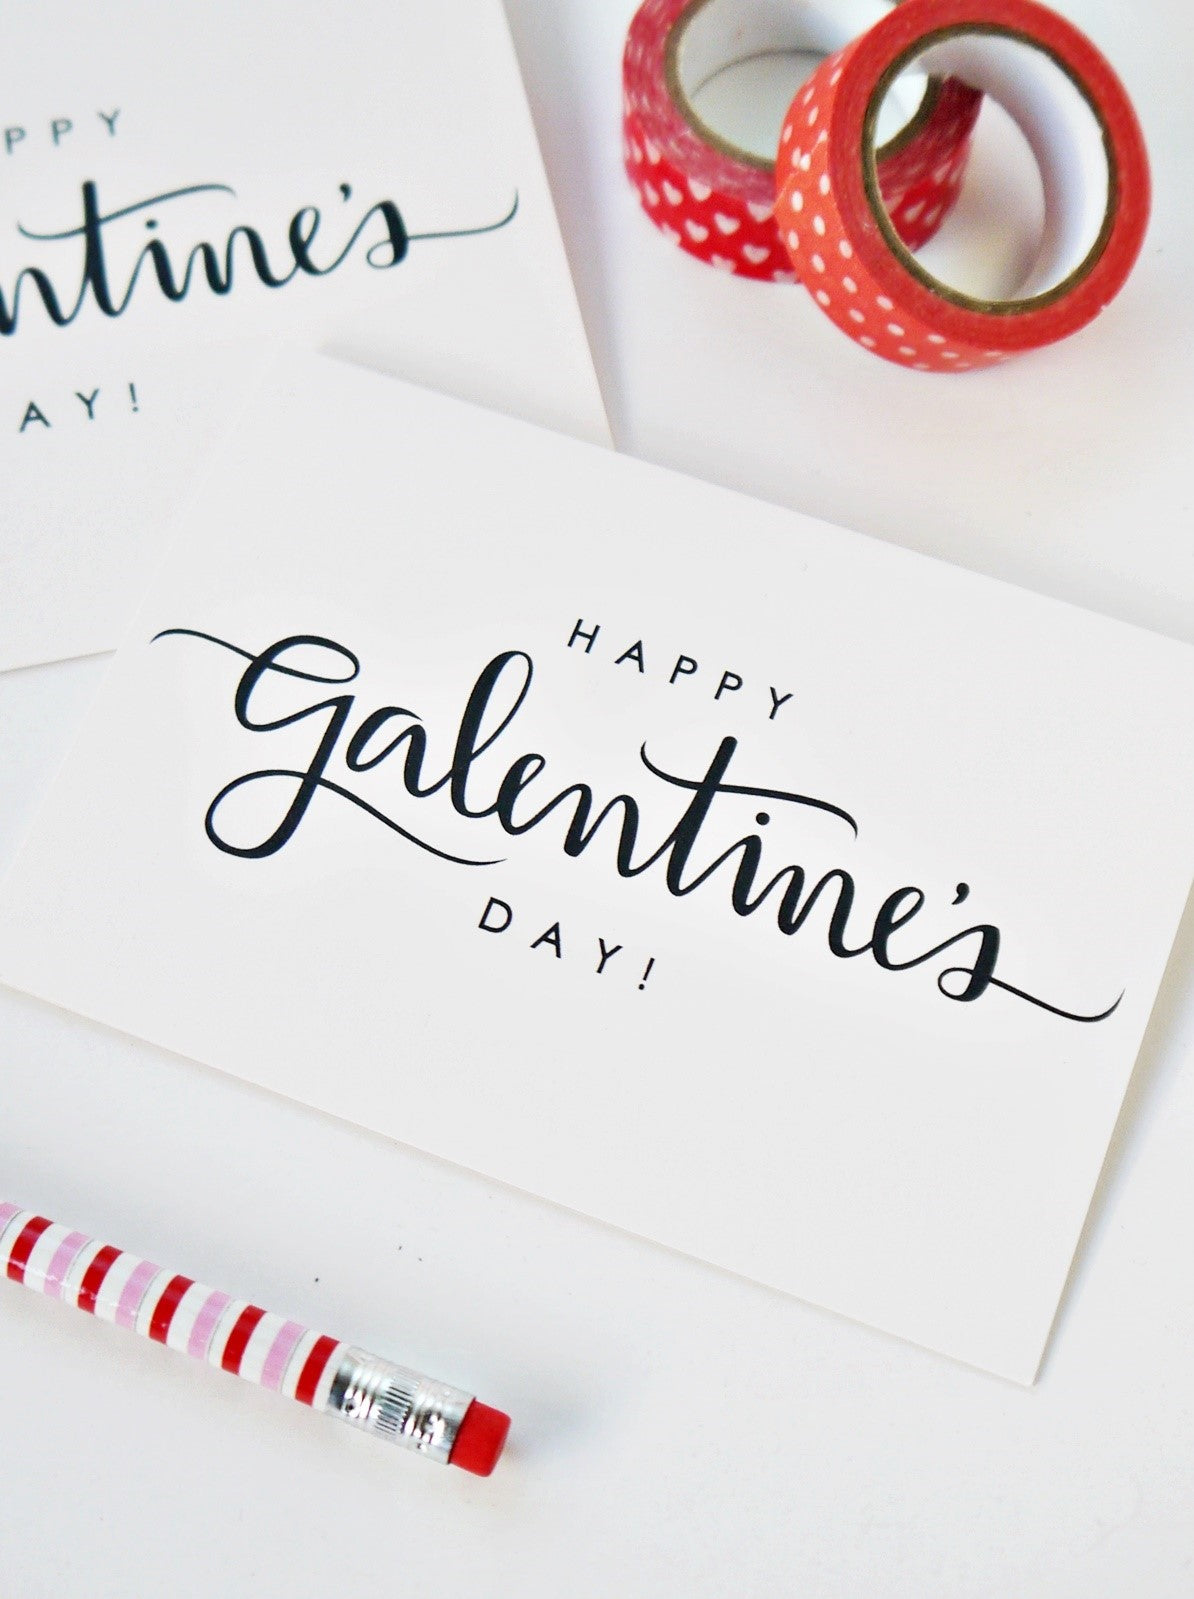 Happy Galentine's Day Card, Set of 6, A1 & A2 Sizes Available